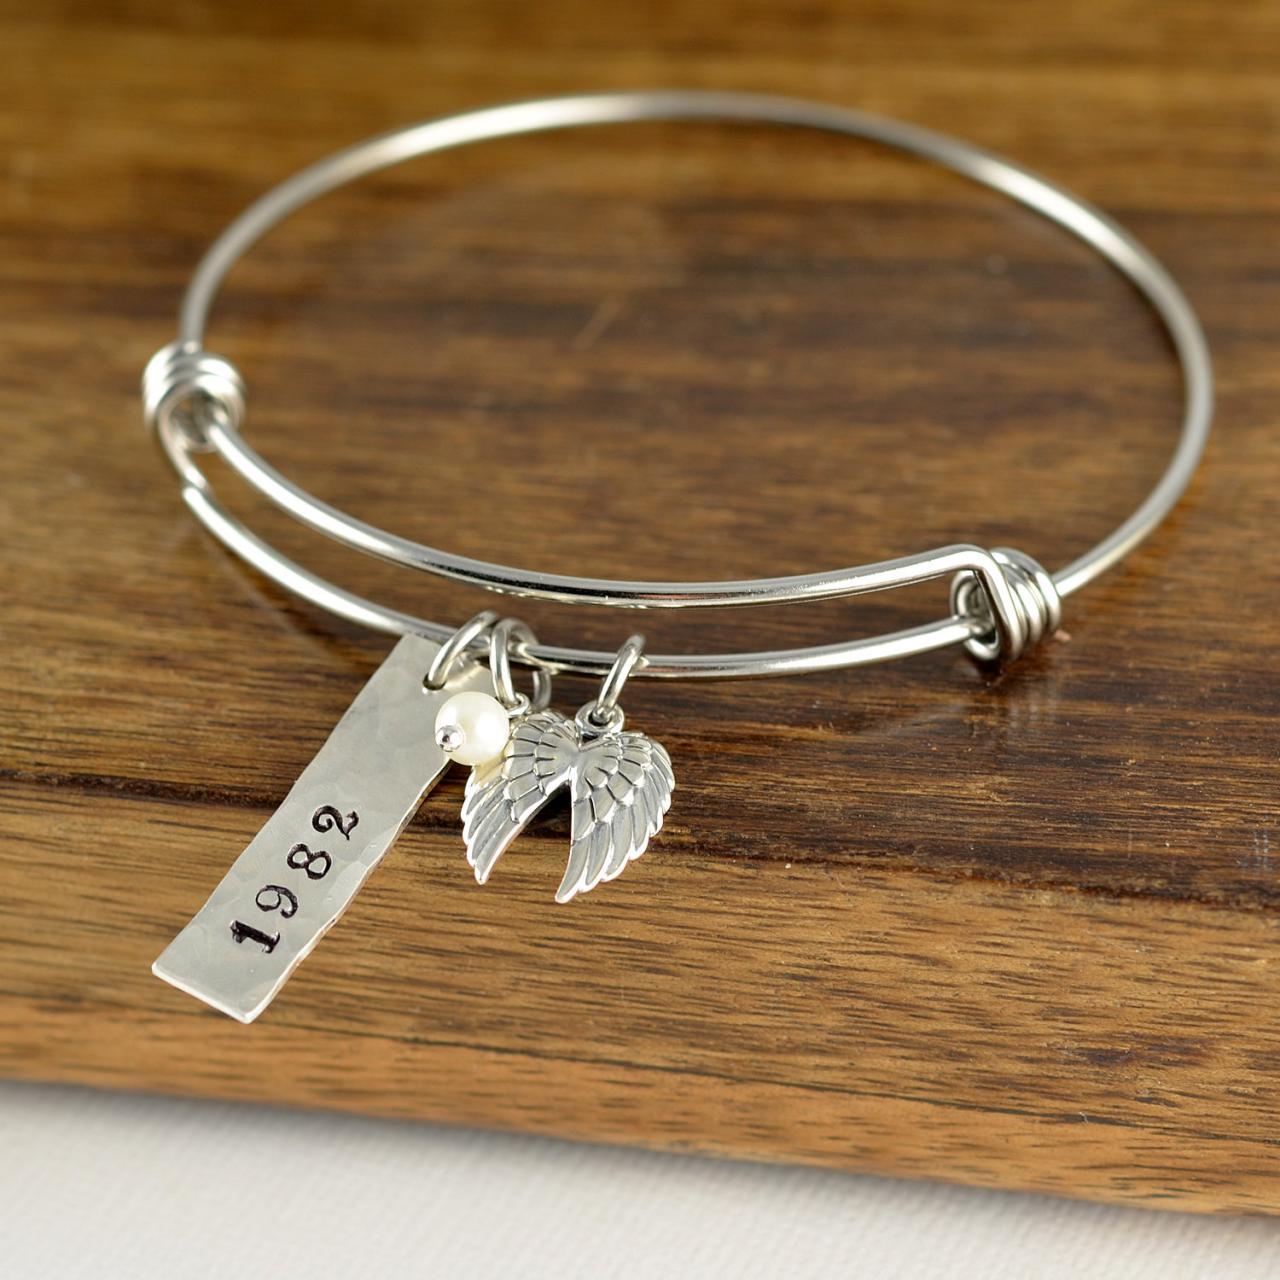 Wing Bracelet, Sympathy Gift, Memorial Bracelet, Memorial Jewelry, Remembrance Gifts, Loss Gift, Loss Of Loved One